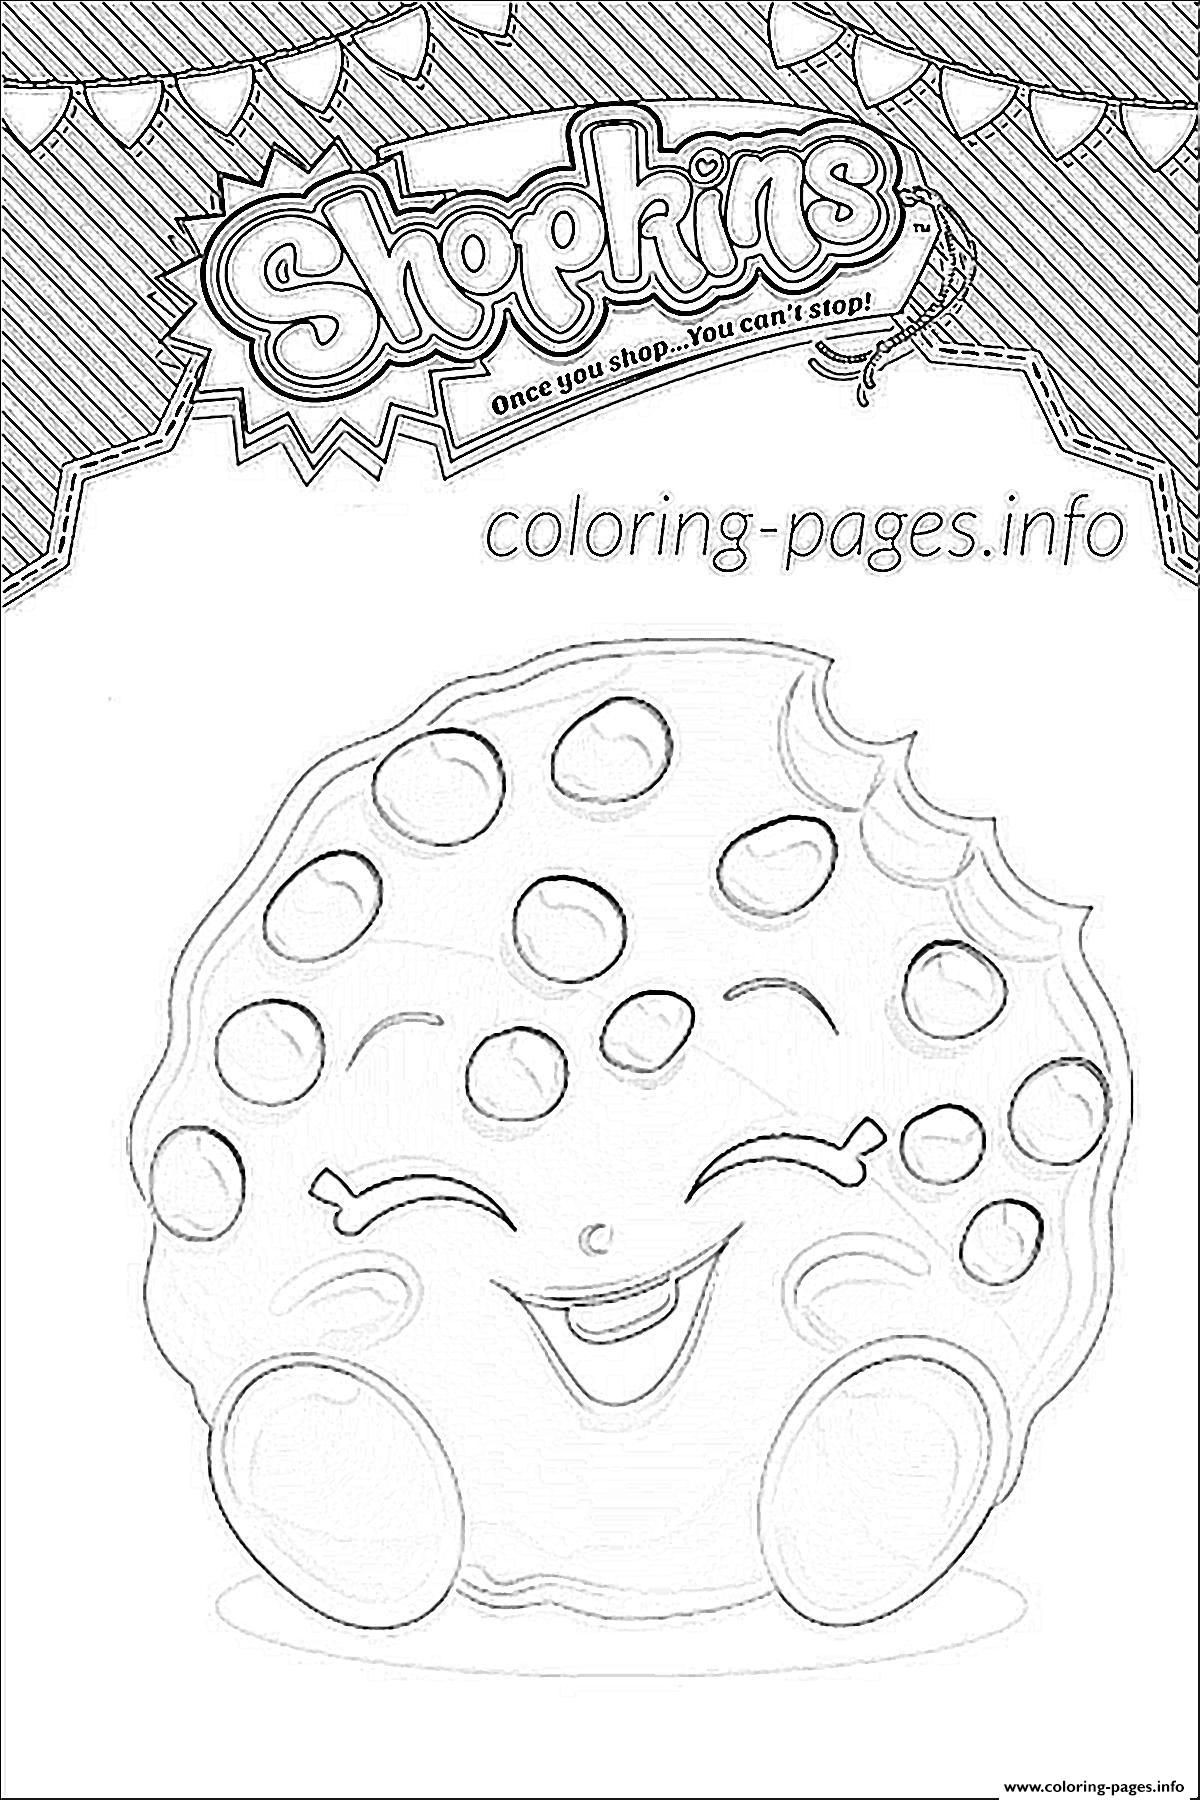 Coloring Pages For Girls Shopkins Cookie
 Print shopkins kooky cookie shoppies coloring pages